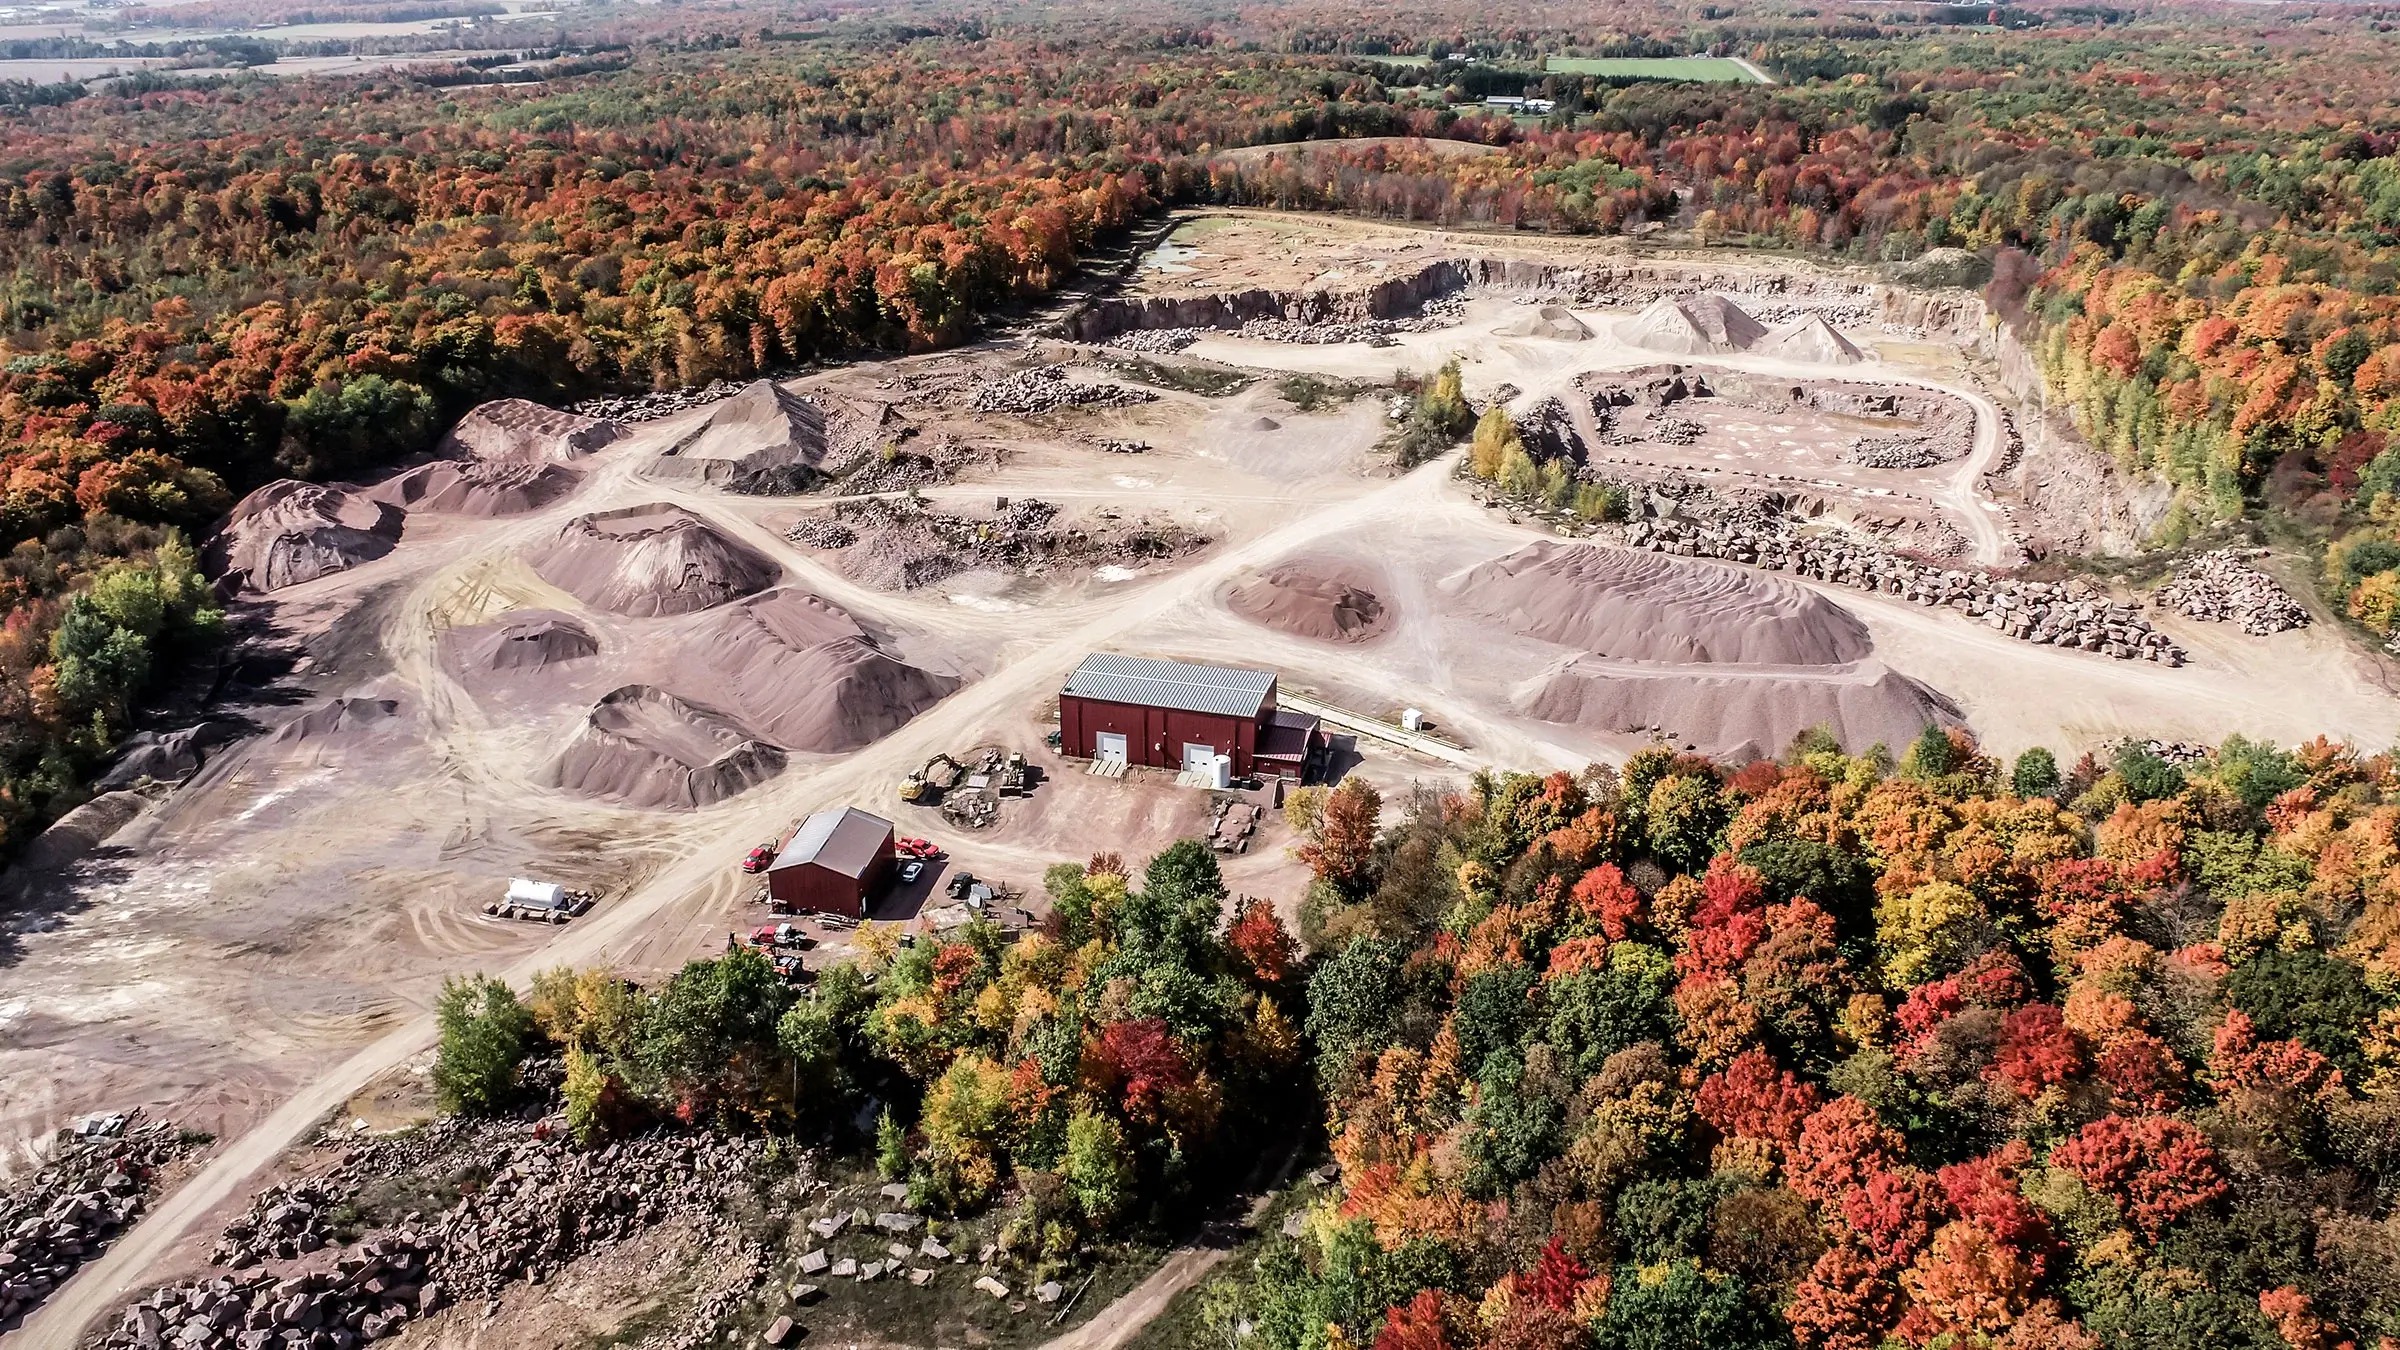 A large quarry surronded by an autumn forest